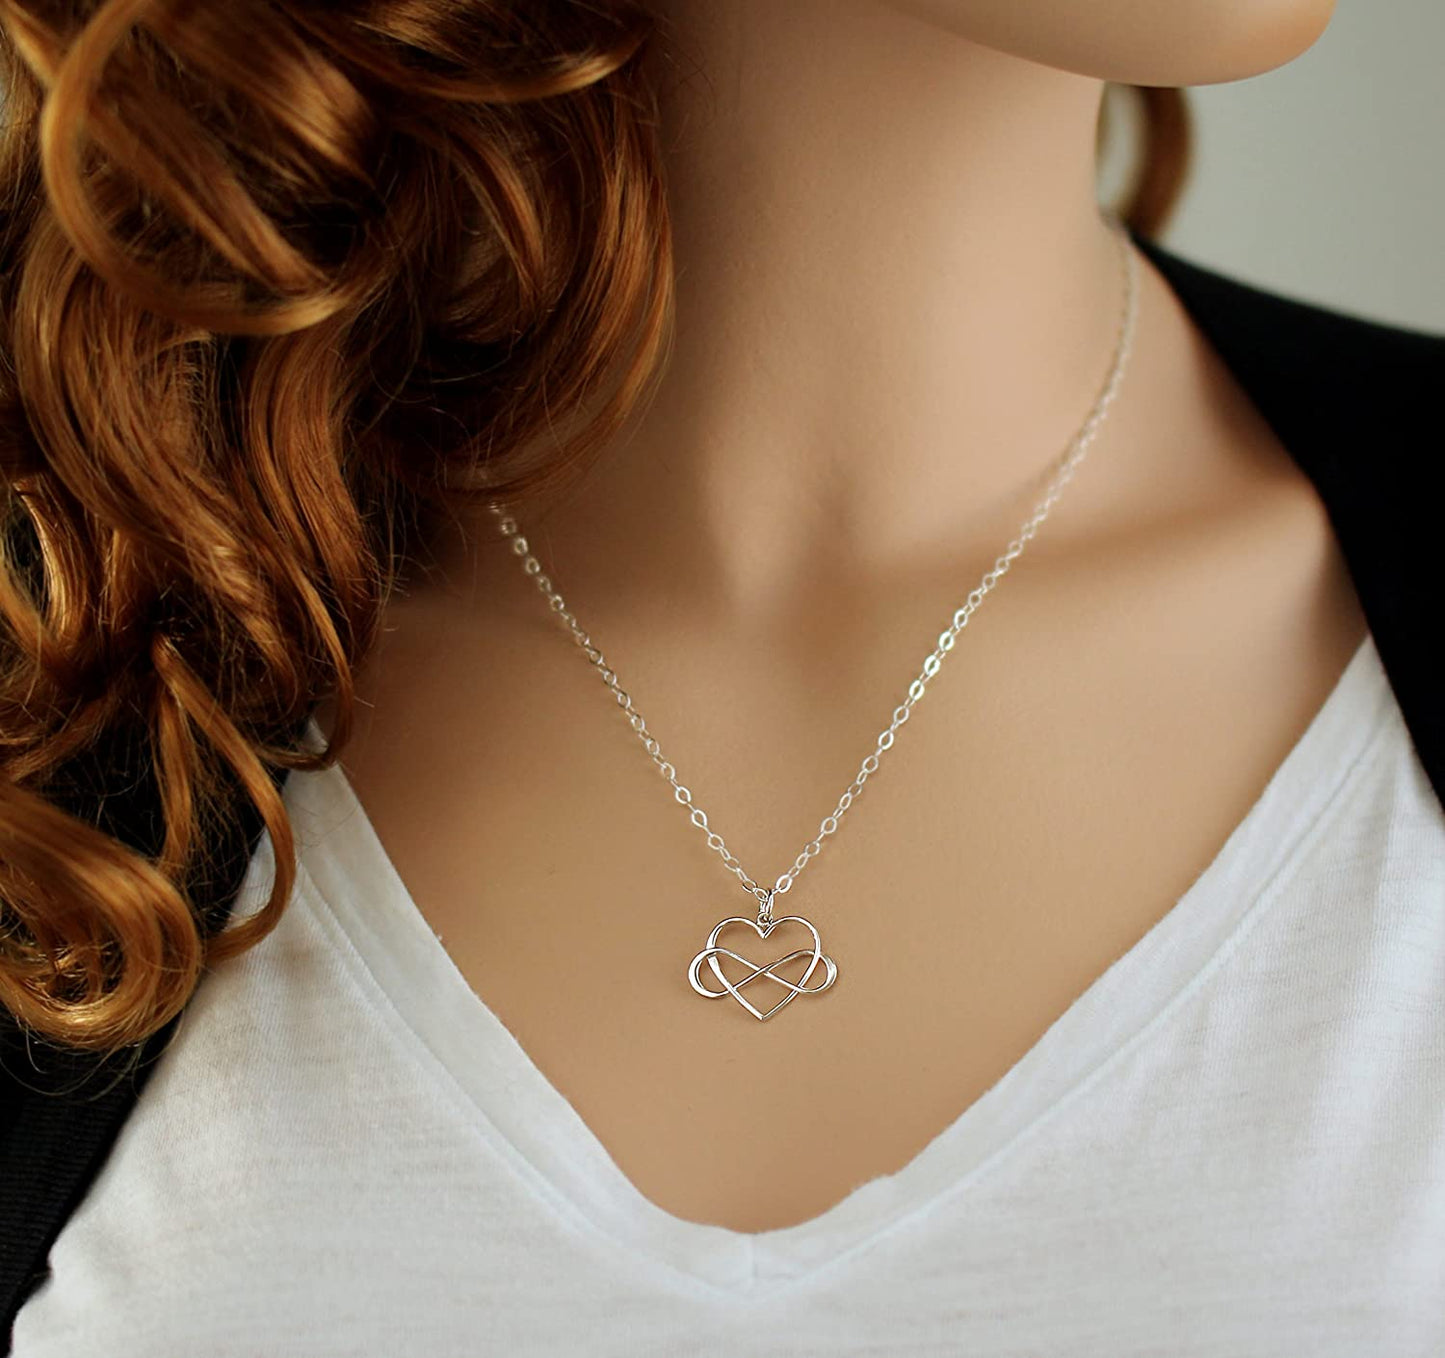 Everyday you Change the World • Silver • Heart with Infinity Necklace • Love Gratitude Appreciation • Inspirational Jewelry